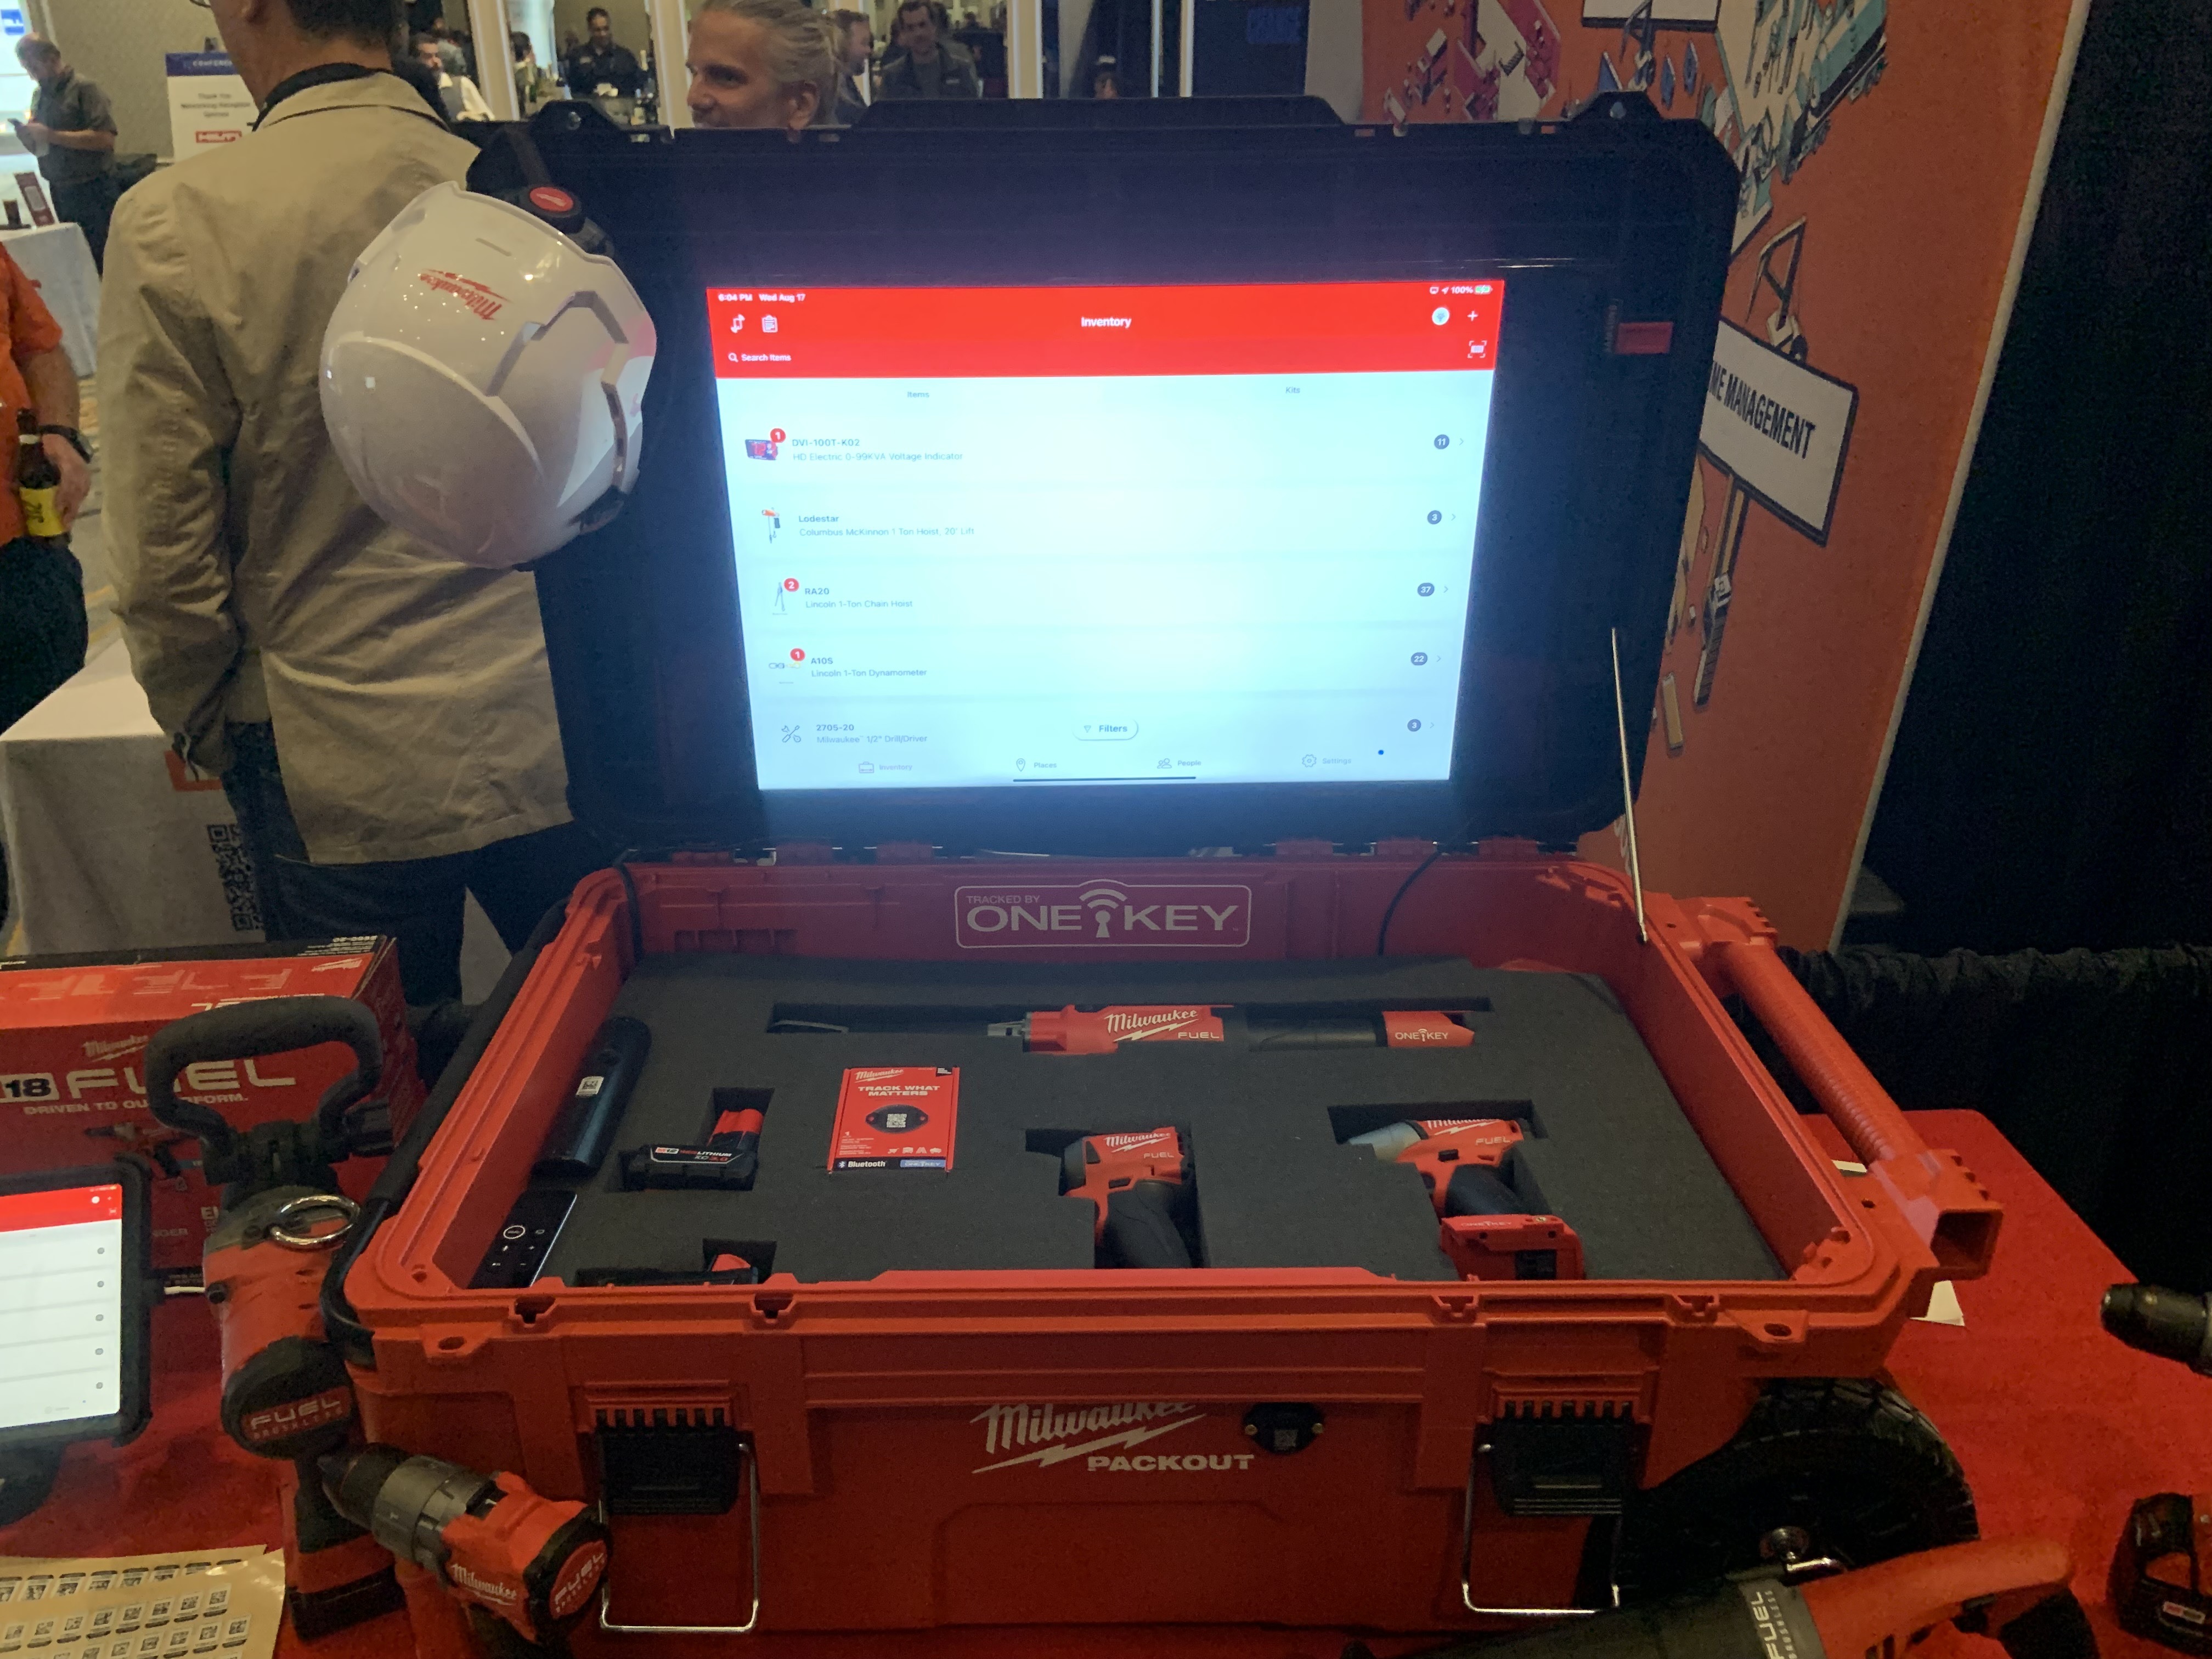 One-Key displayed on monitor of open booth-in-a-box with Milwaukee Tool products